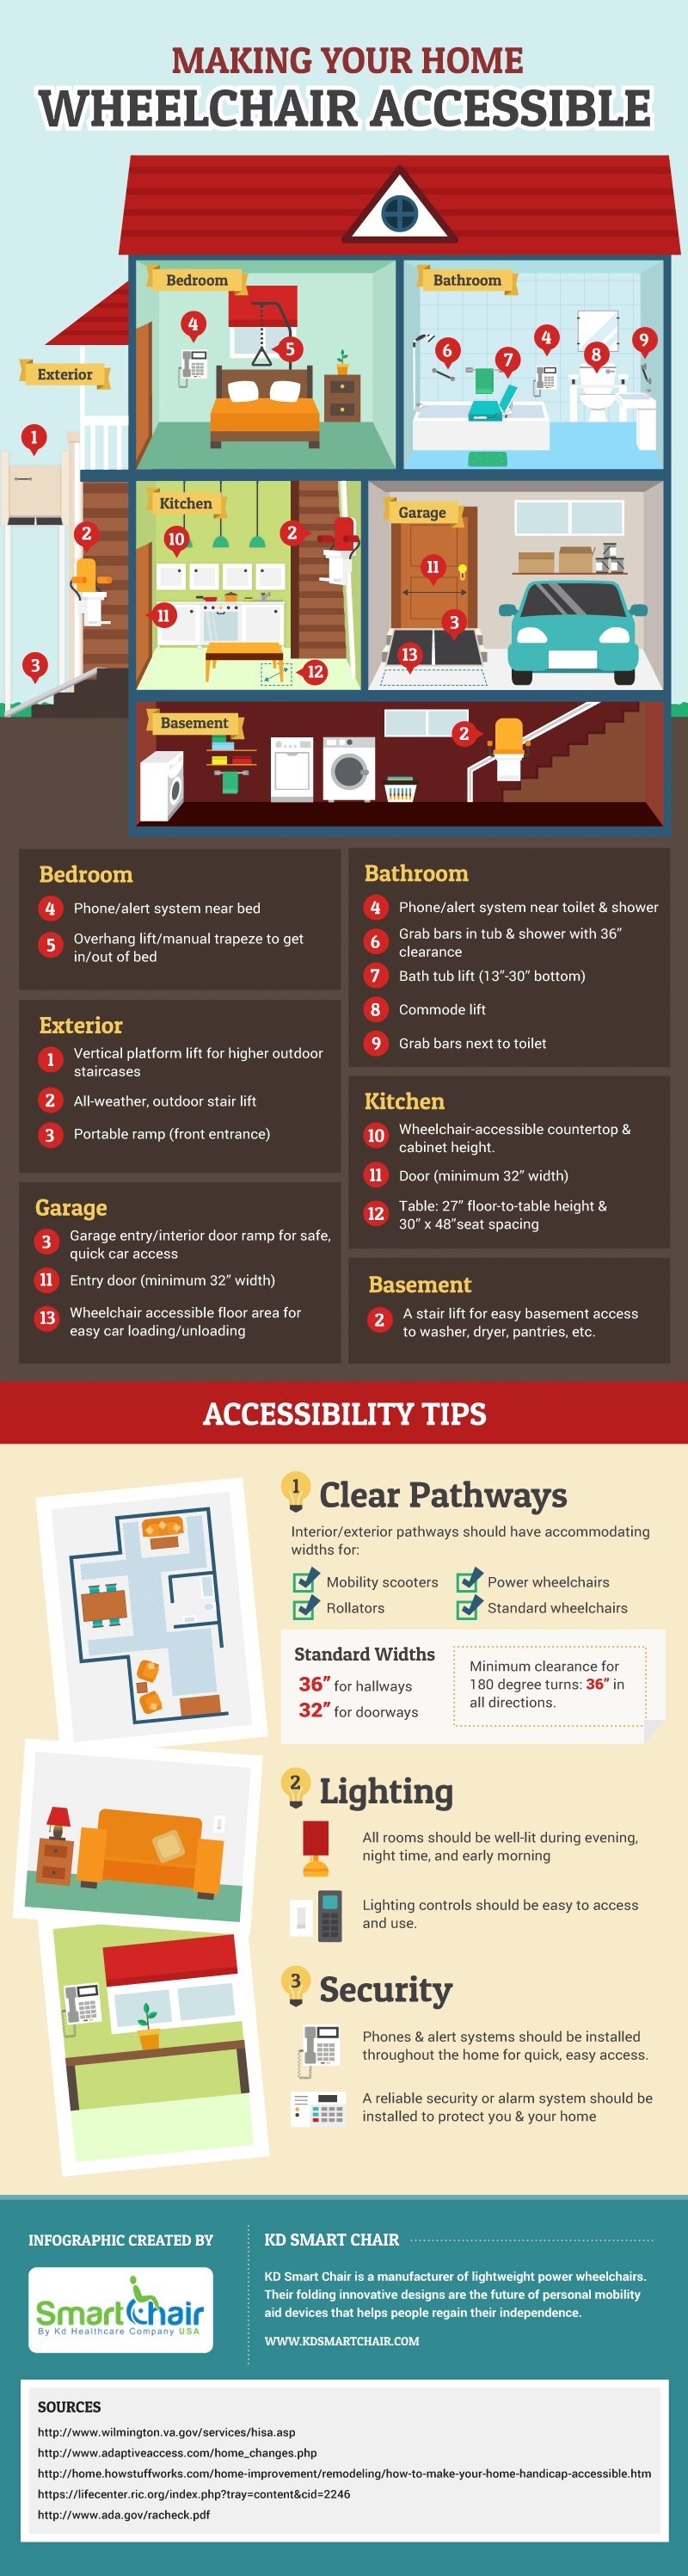 making your home wheelchair accessible infographic